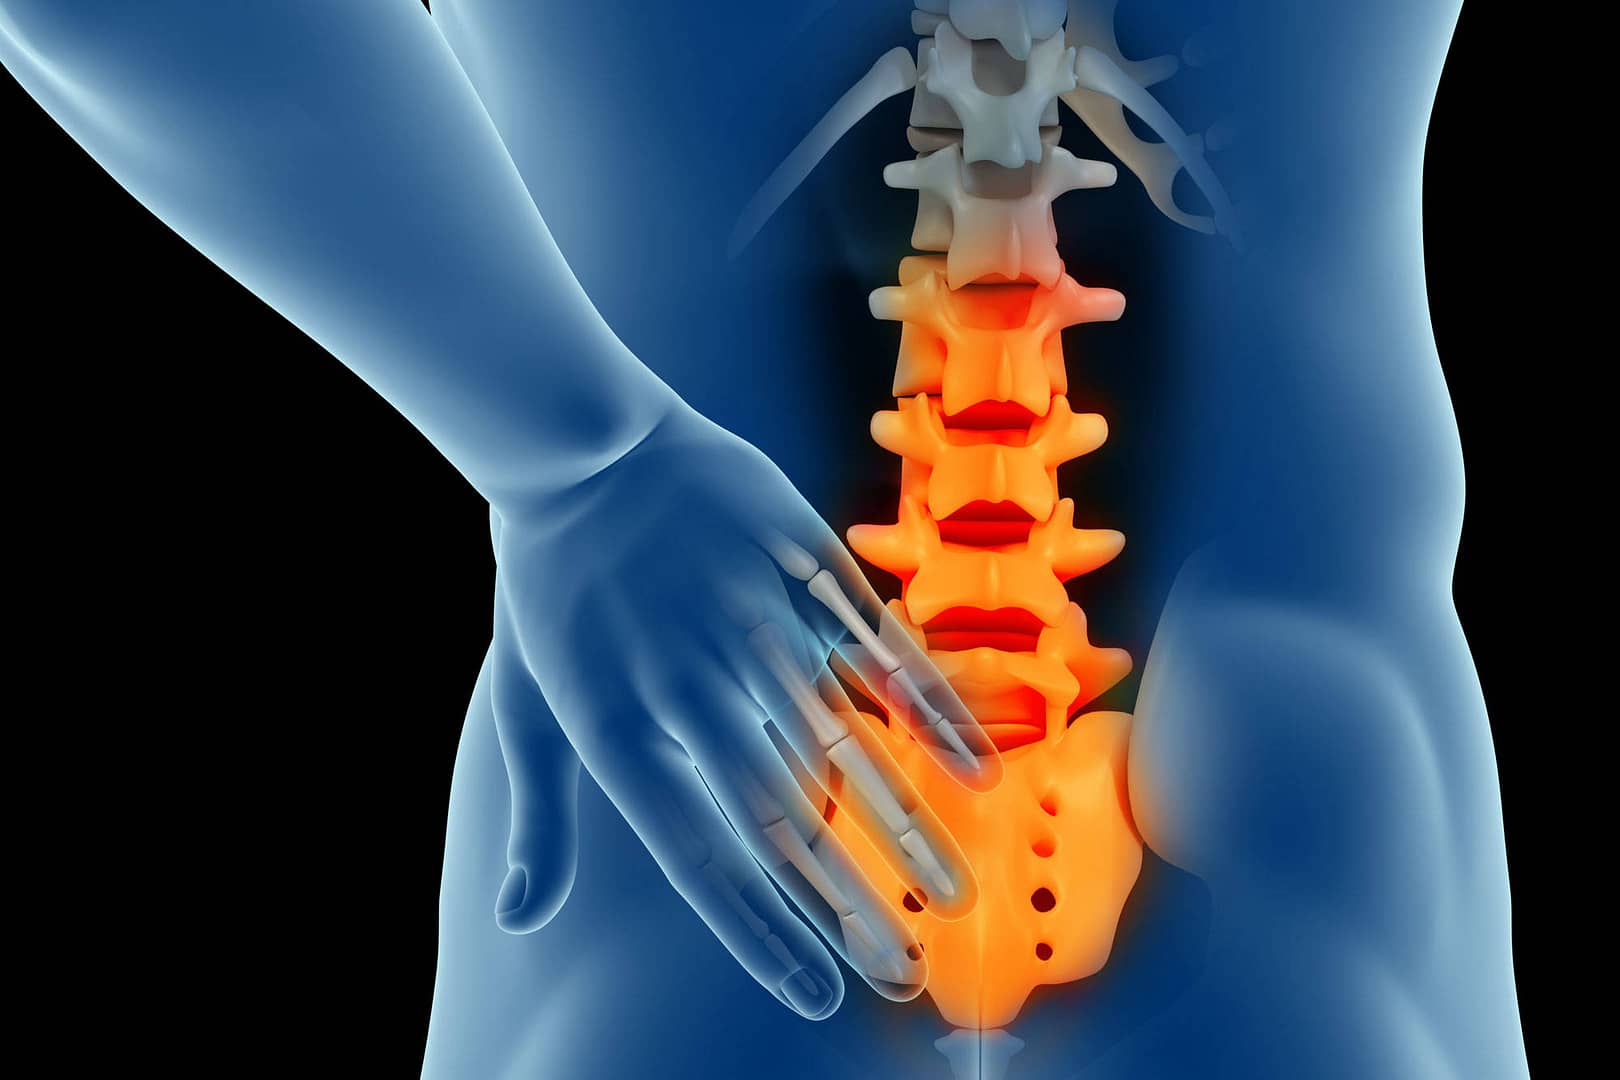 the back pain project offers relief for chronic back pain